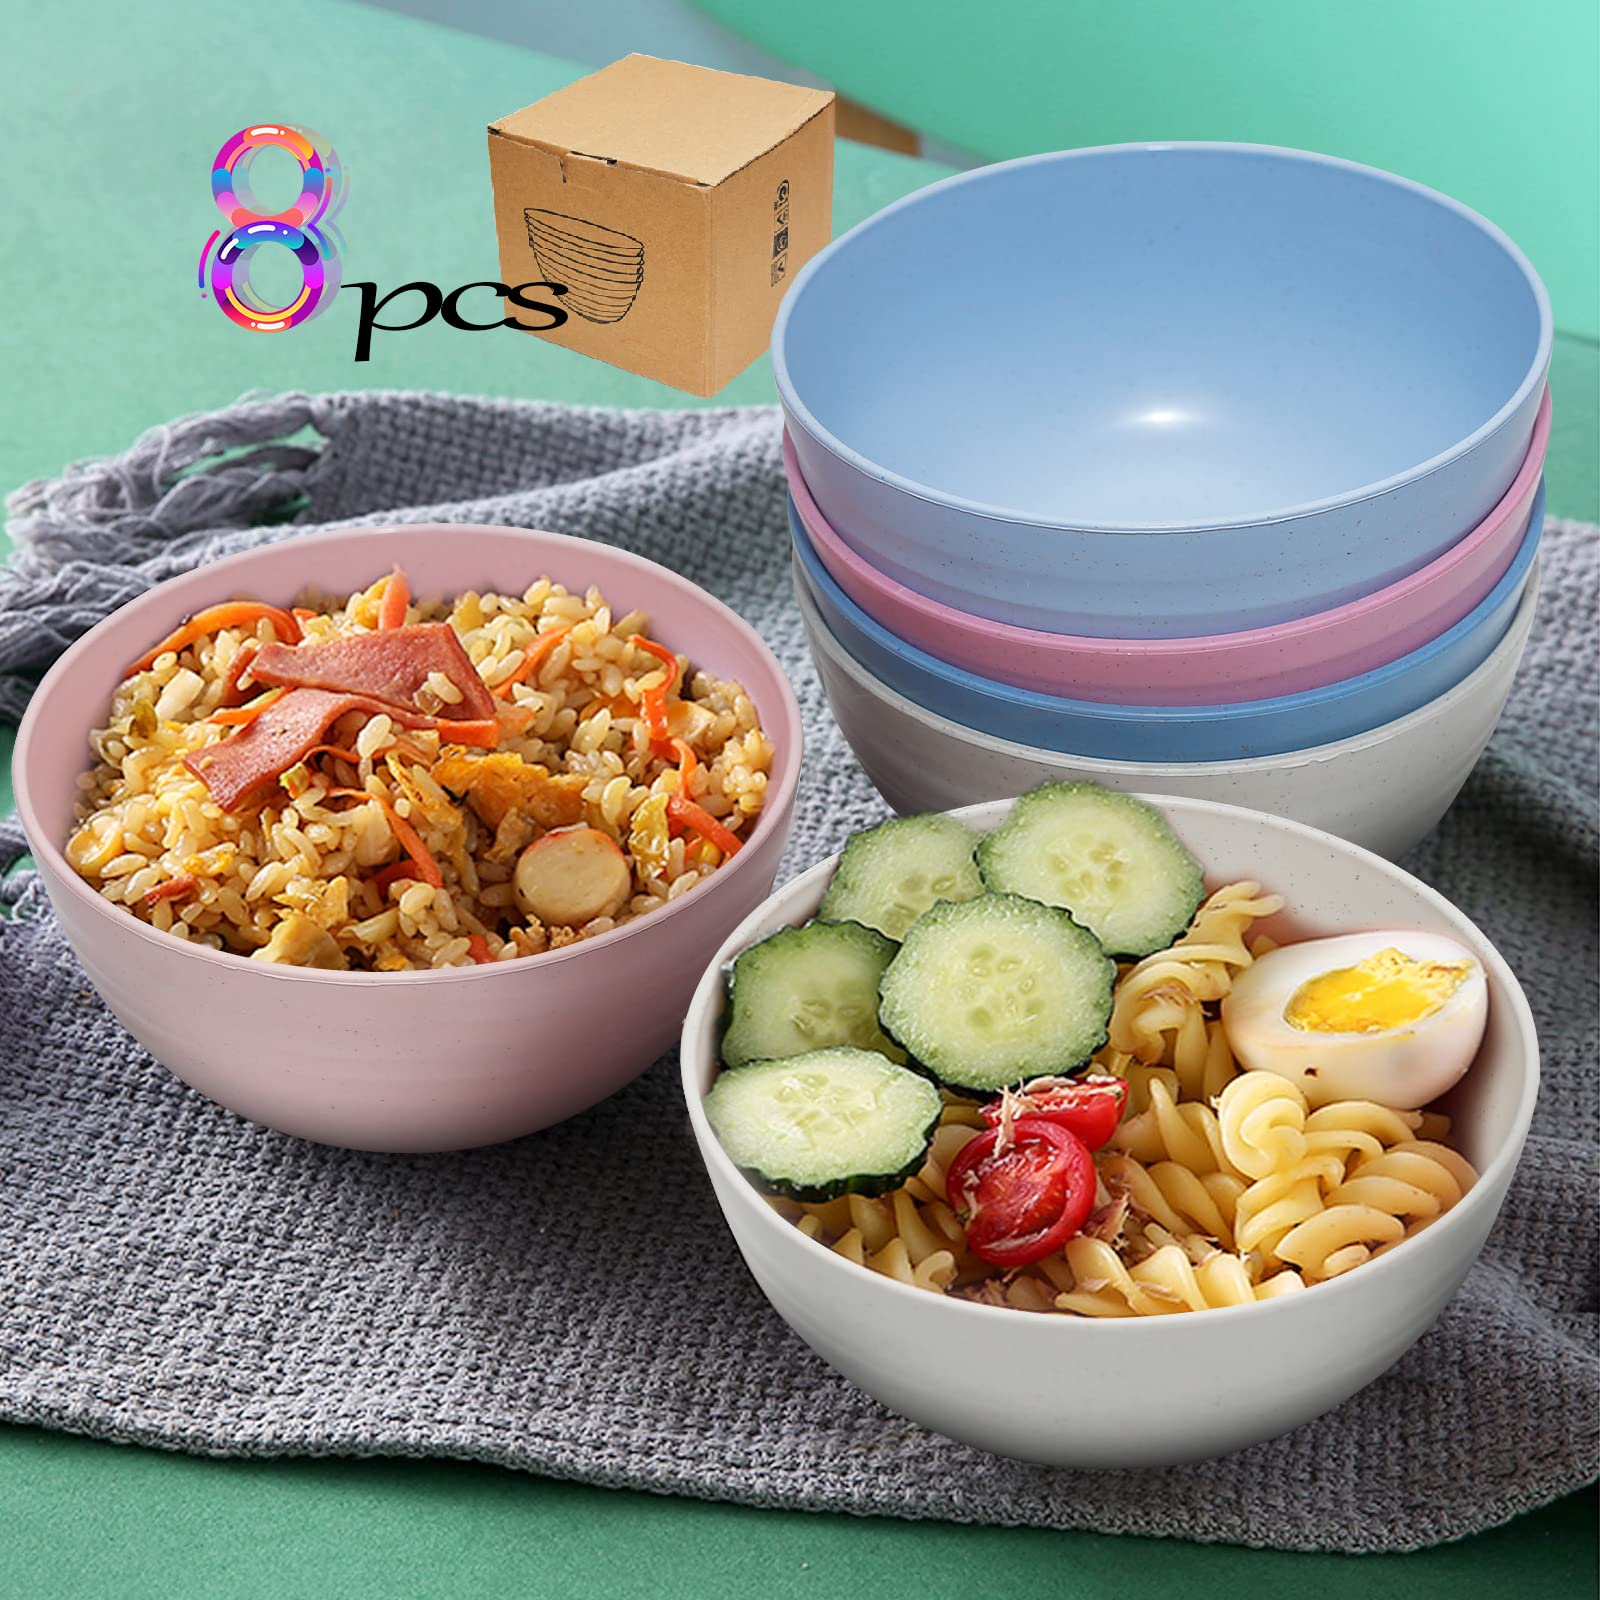 DAPIPIK 8 PACK Unbreakable Cereal Bowls,24 OZ Eco-Friendly Wheat Straw Bowls,Dishwasher & Microwave Safe .Durable, suitable for Noodles, Soups, Desserts, Salads,Rice